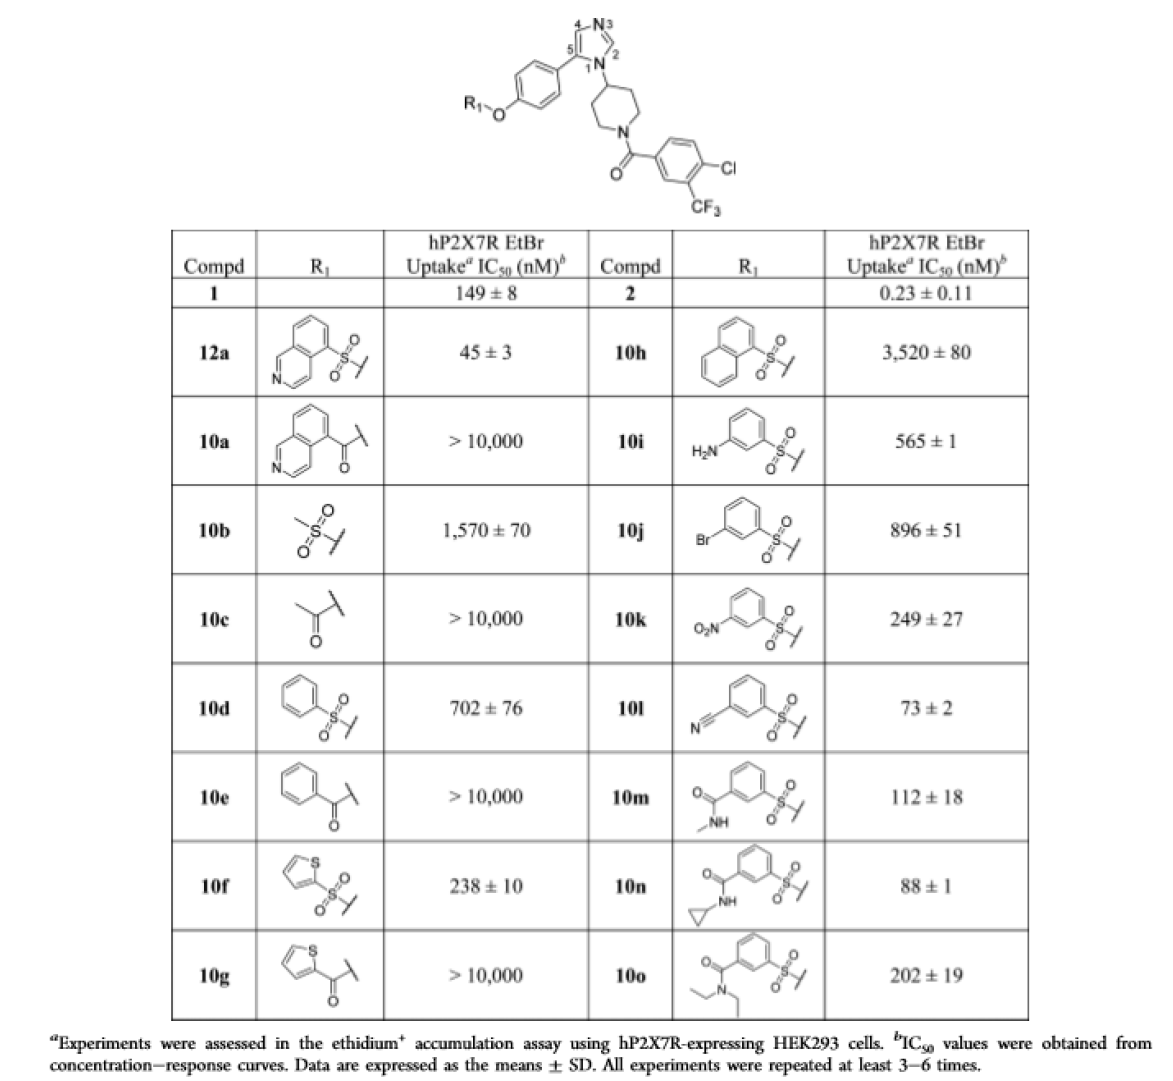 P2X7R Antagonist Activity of 1,5-Imidazole Derivatives with Various Substituted Phenyl Substituents